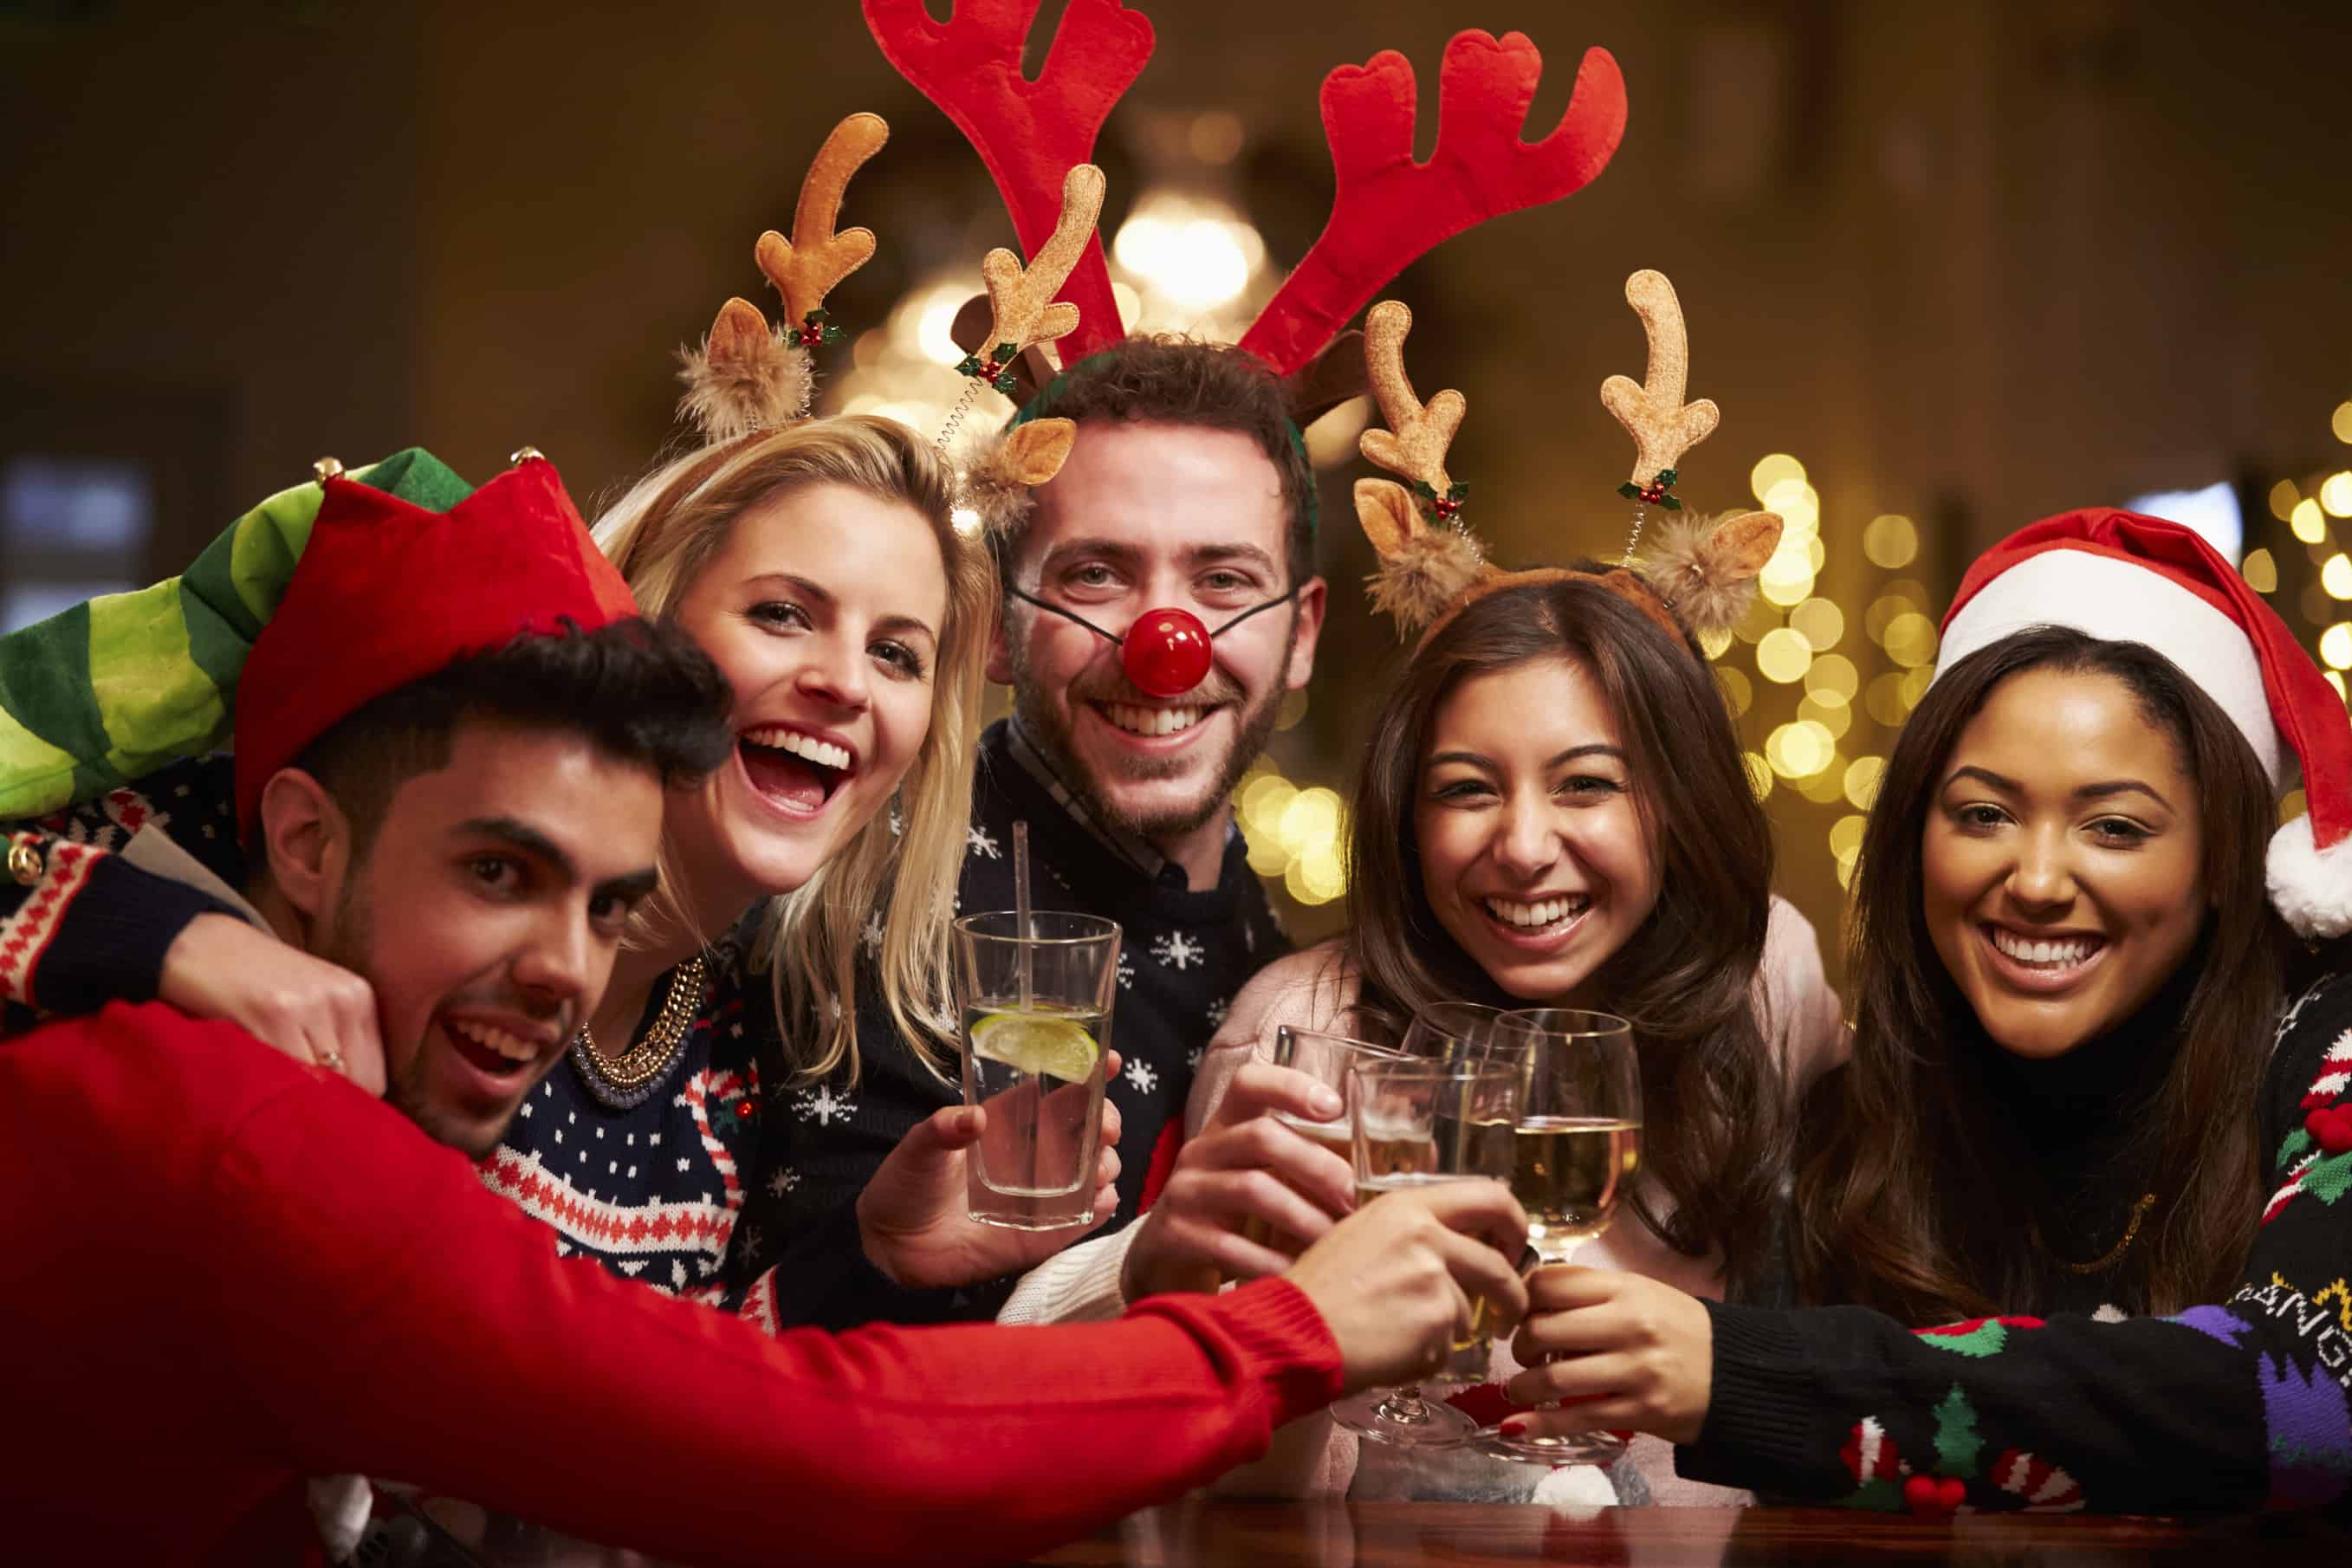 Is Your Company’s Christmas Party Tax Deductible? Aston Shaw